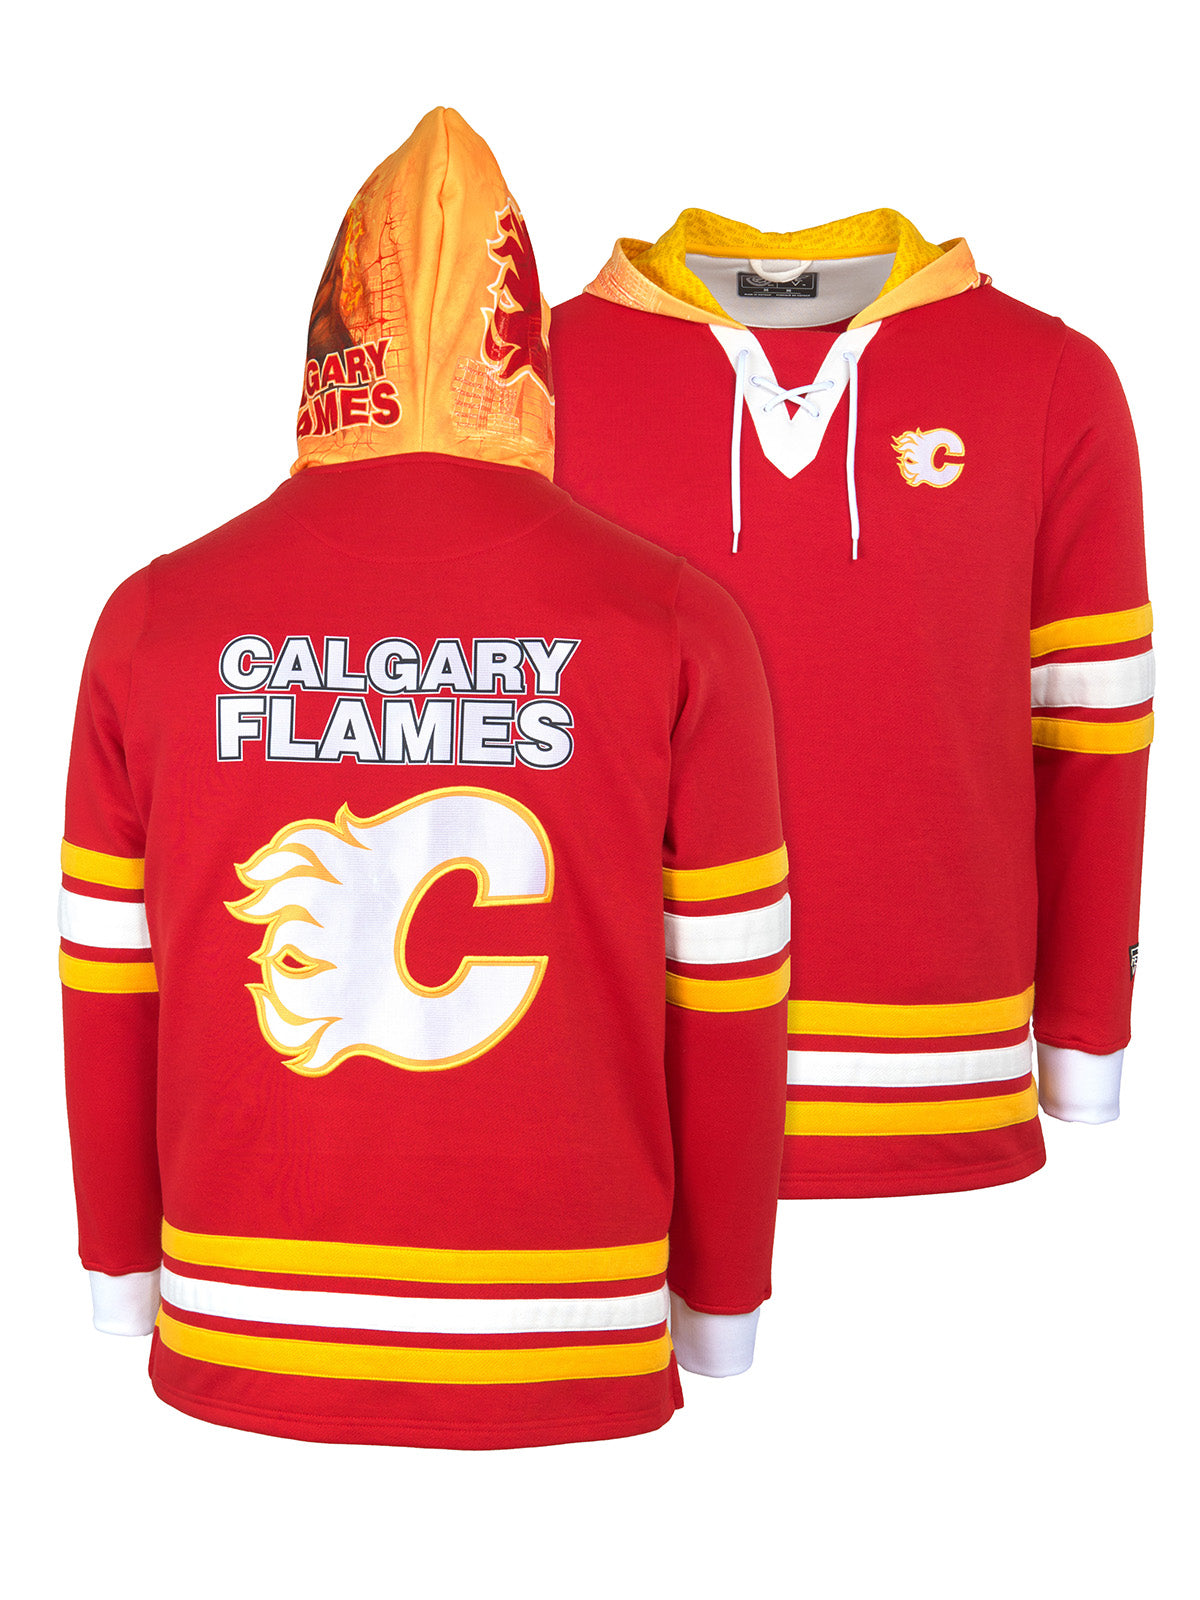 Calgary Flames Lace-Up Hoodie - Hand drawn custom hood designs with  all the team colors and craftmanship to replicate the gameday jersey of this NHL hoodie